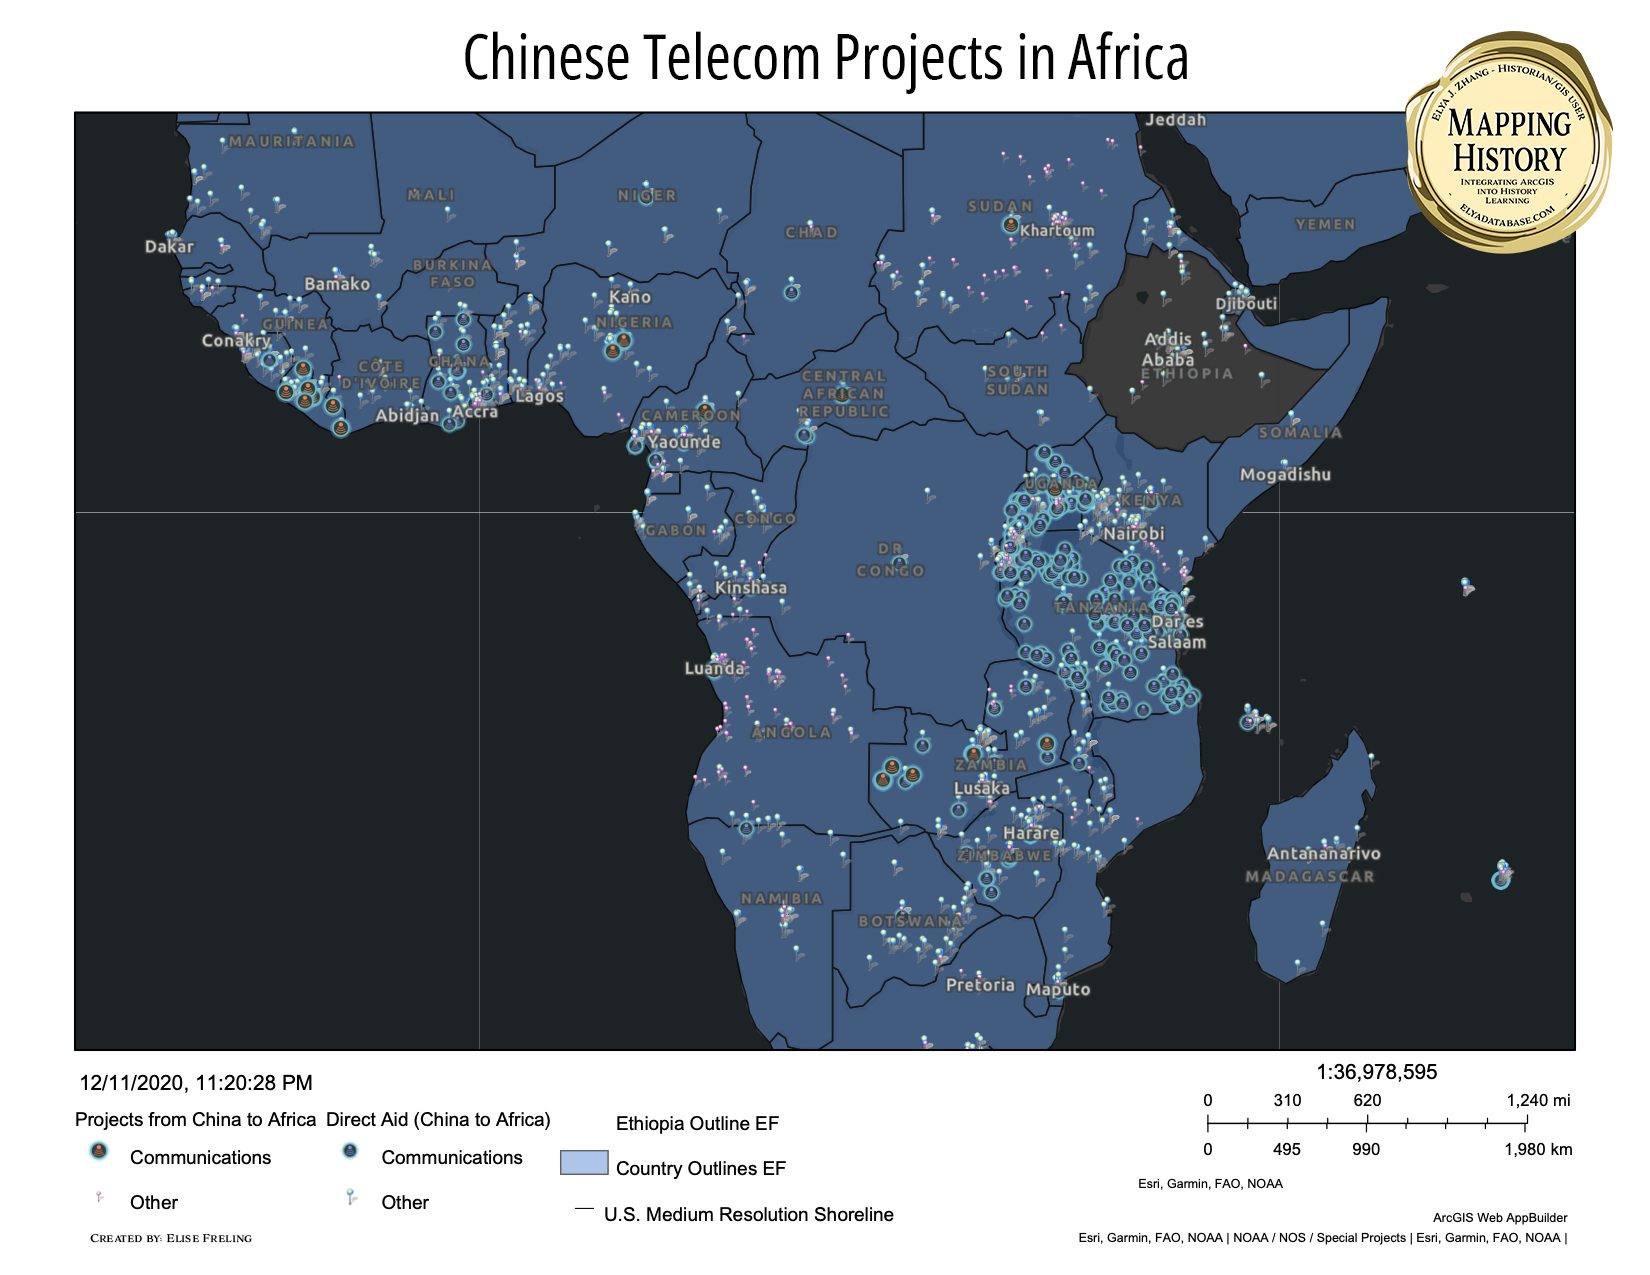 China-Built Telecom Infrastructure in Ethiopia